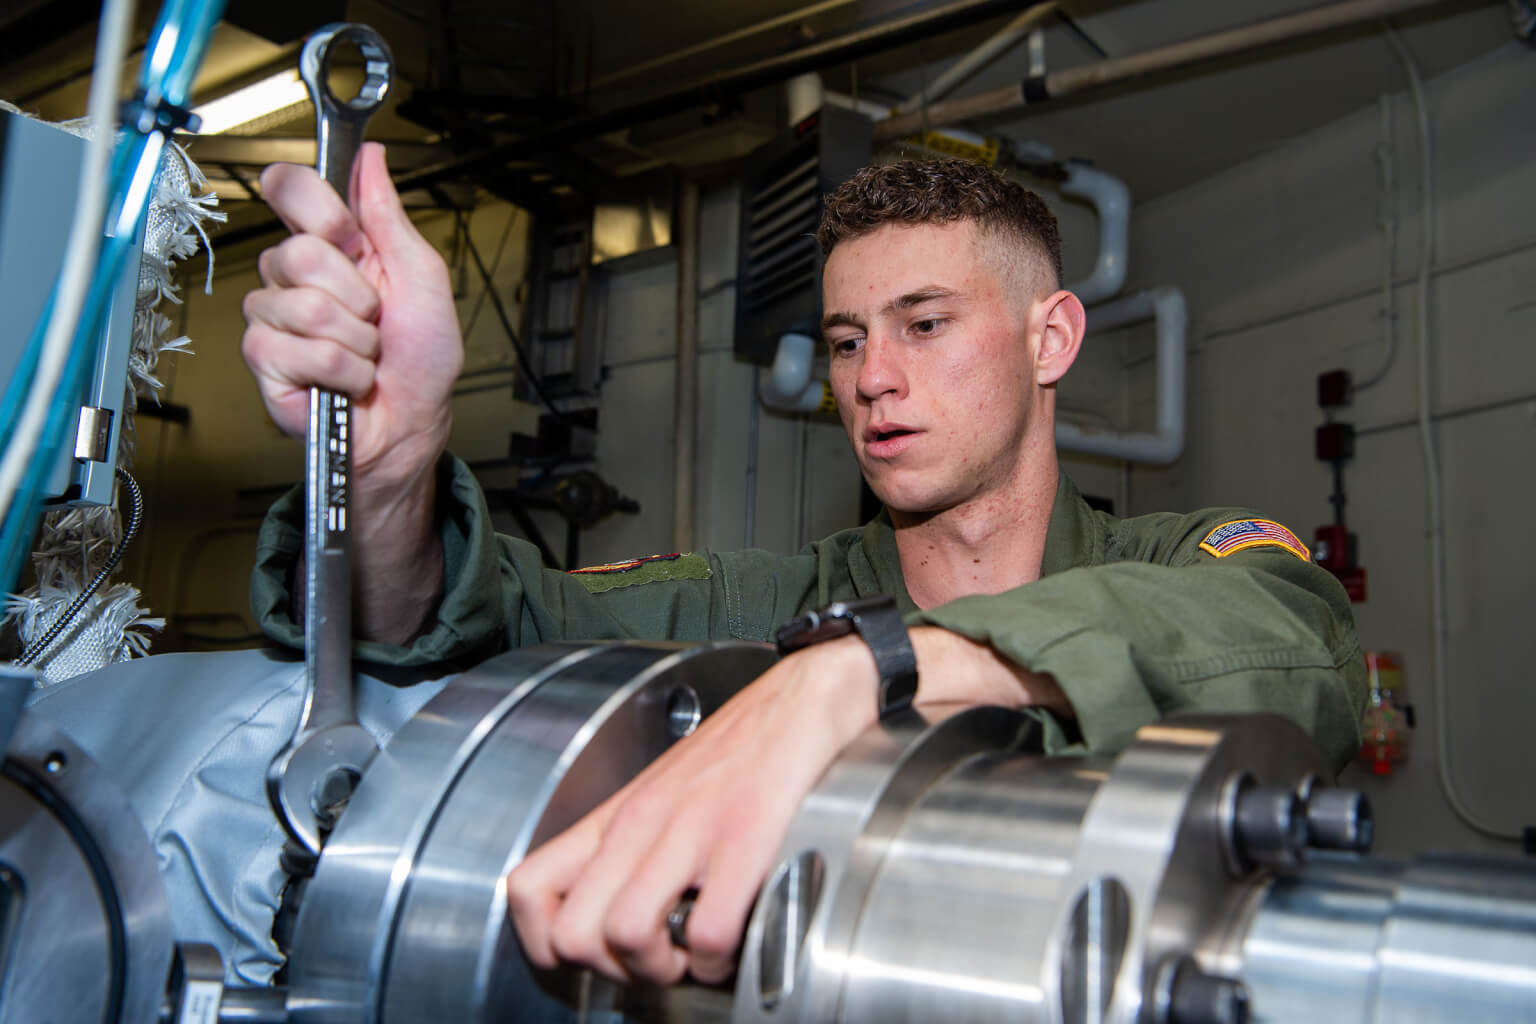 2nd Lt. Nicholas X. Hawley works on the combustion shock tube, on which he completed much of his experimental research.